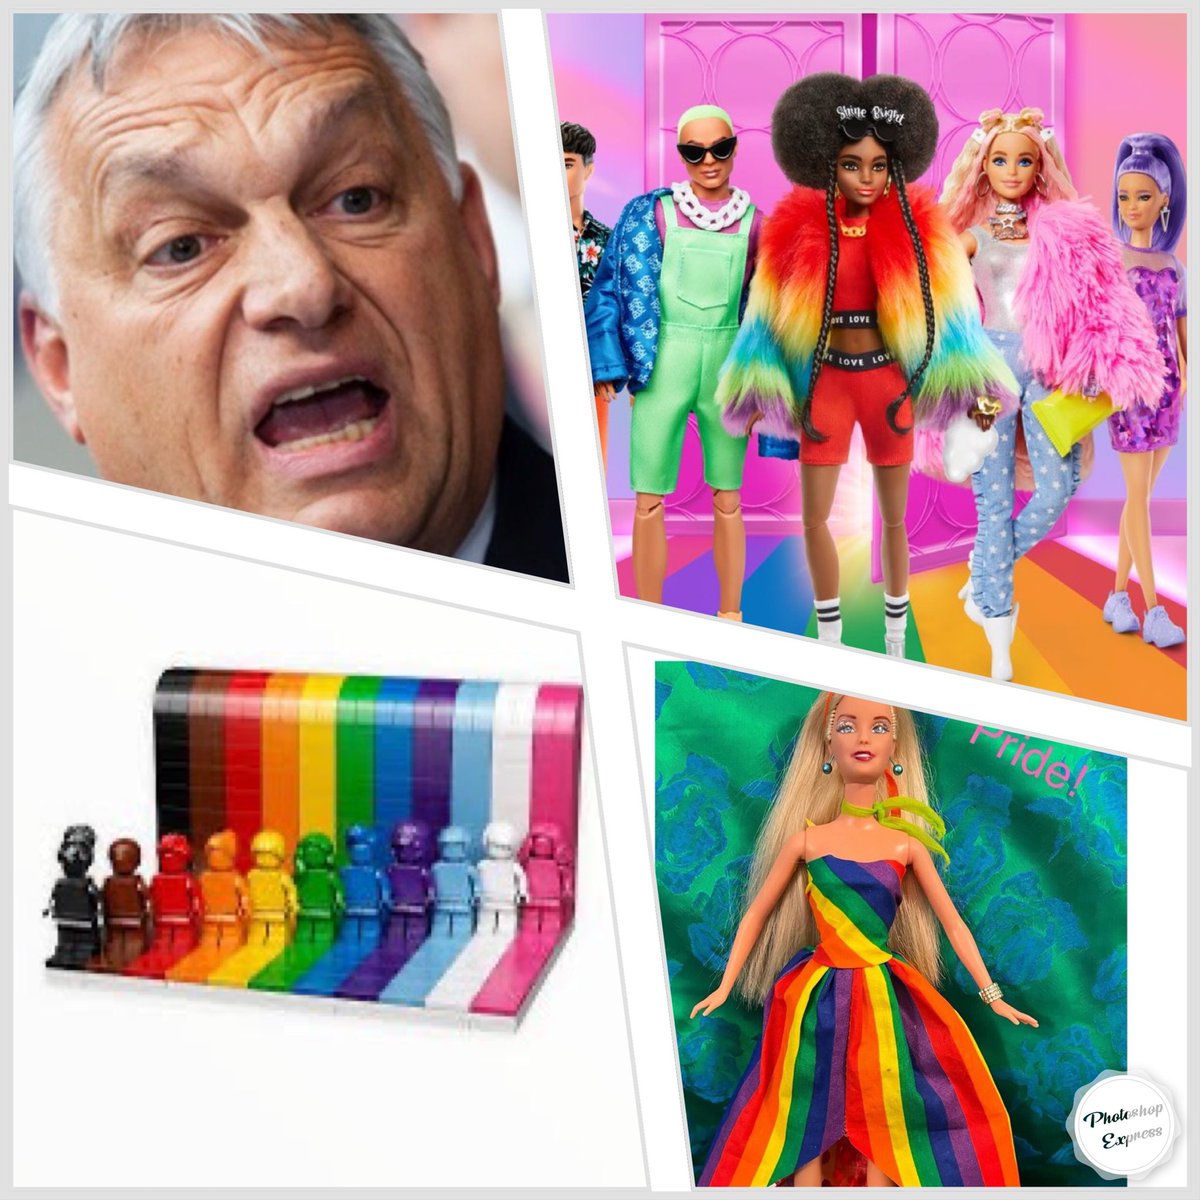 Lego’s “Everyone Is Awesome” set, LGBTQ Barbie dolls, Books, films,…. Hungary wants to censor non-heterosexual images even more strictly. Orban, the bloody tyrant, is trying “to protect” minors from the topic of homosexuality and transgenderism. “The Hungarian authorities have…